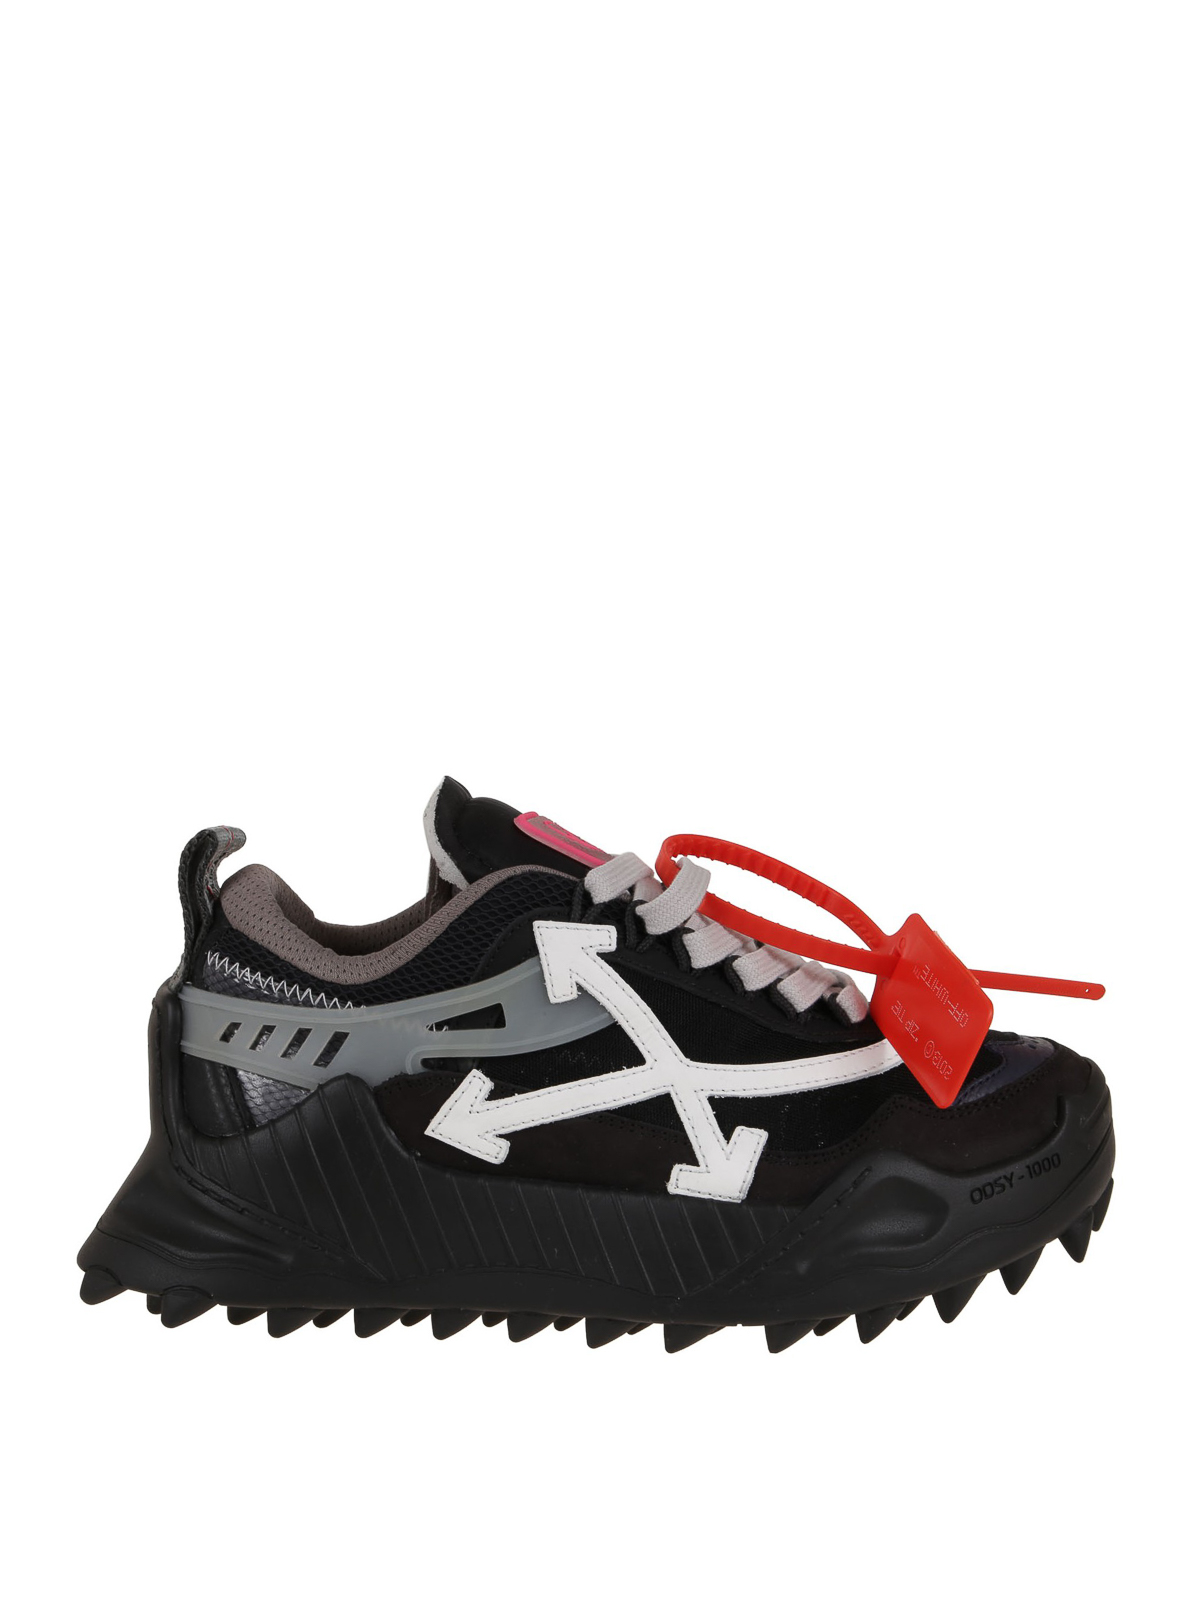 Trainers Off-White - Odsy-1000 sneakers - OWIA180E20FAB0011001 | iKRIX.com